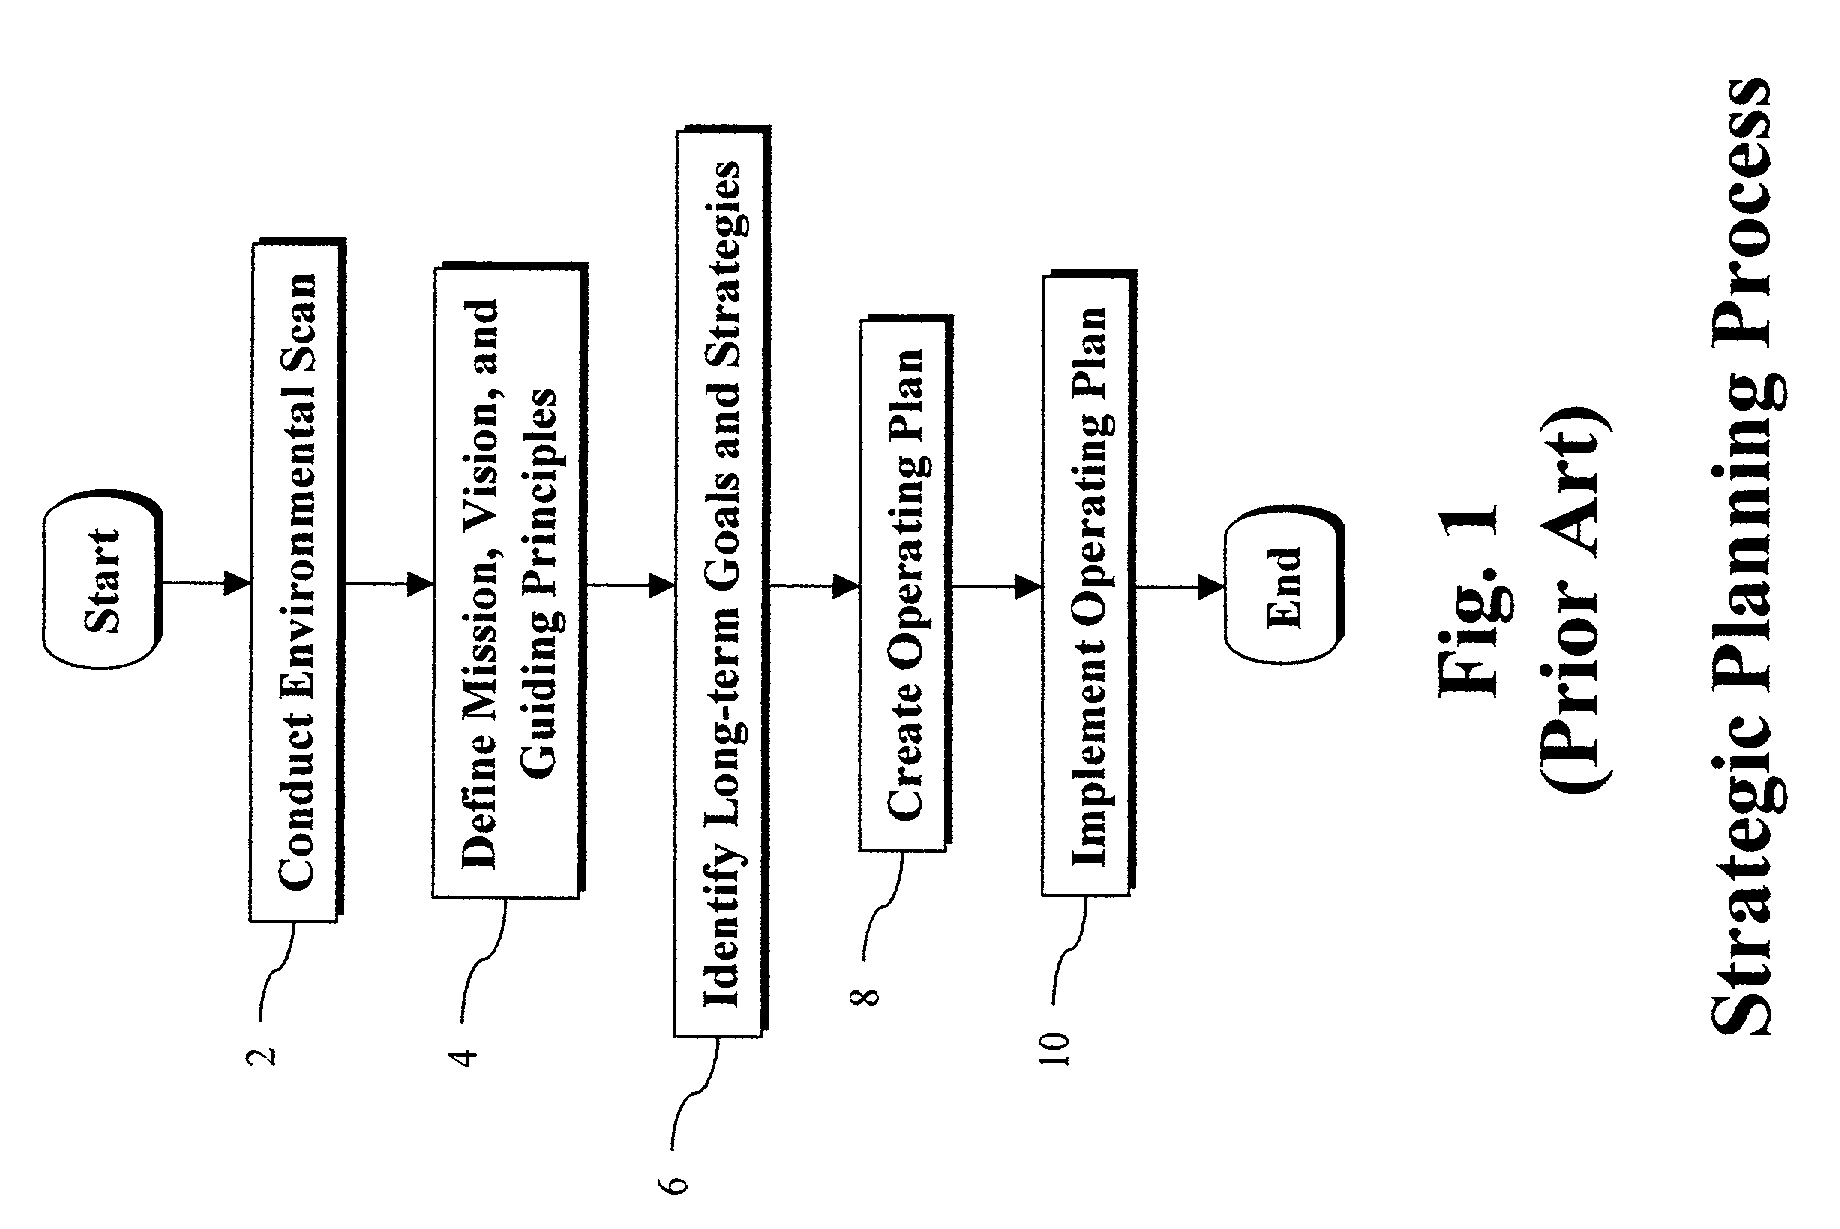 System and method for generating a multi-layered strategy description including integrated implementation requirements